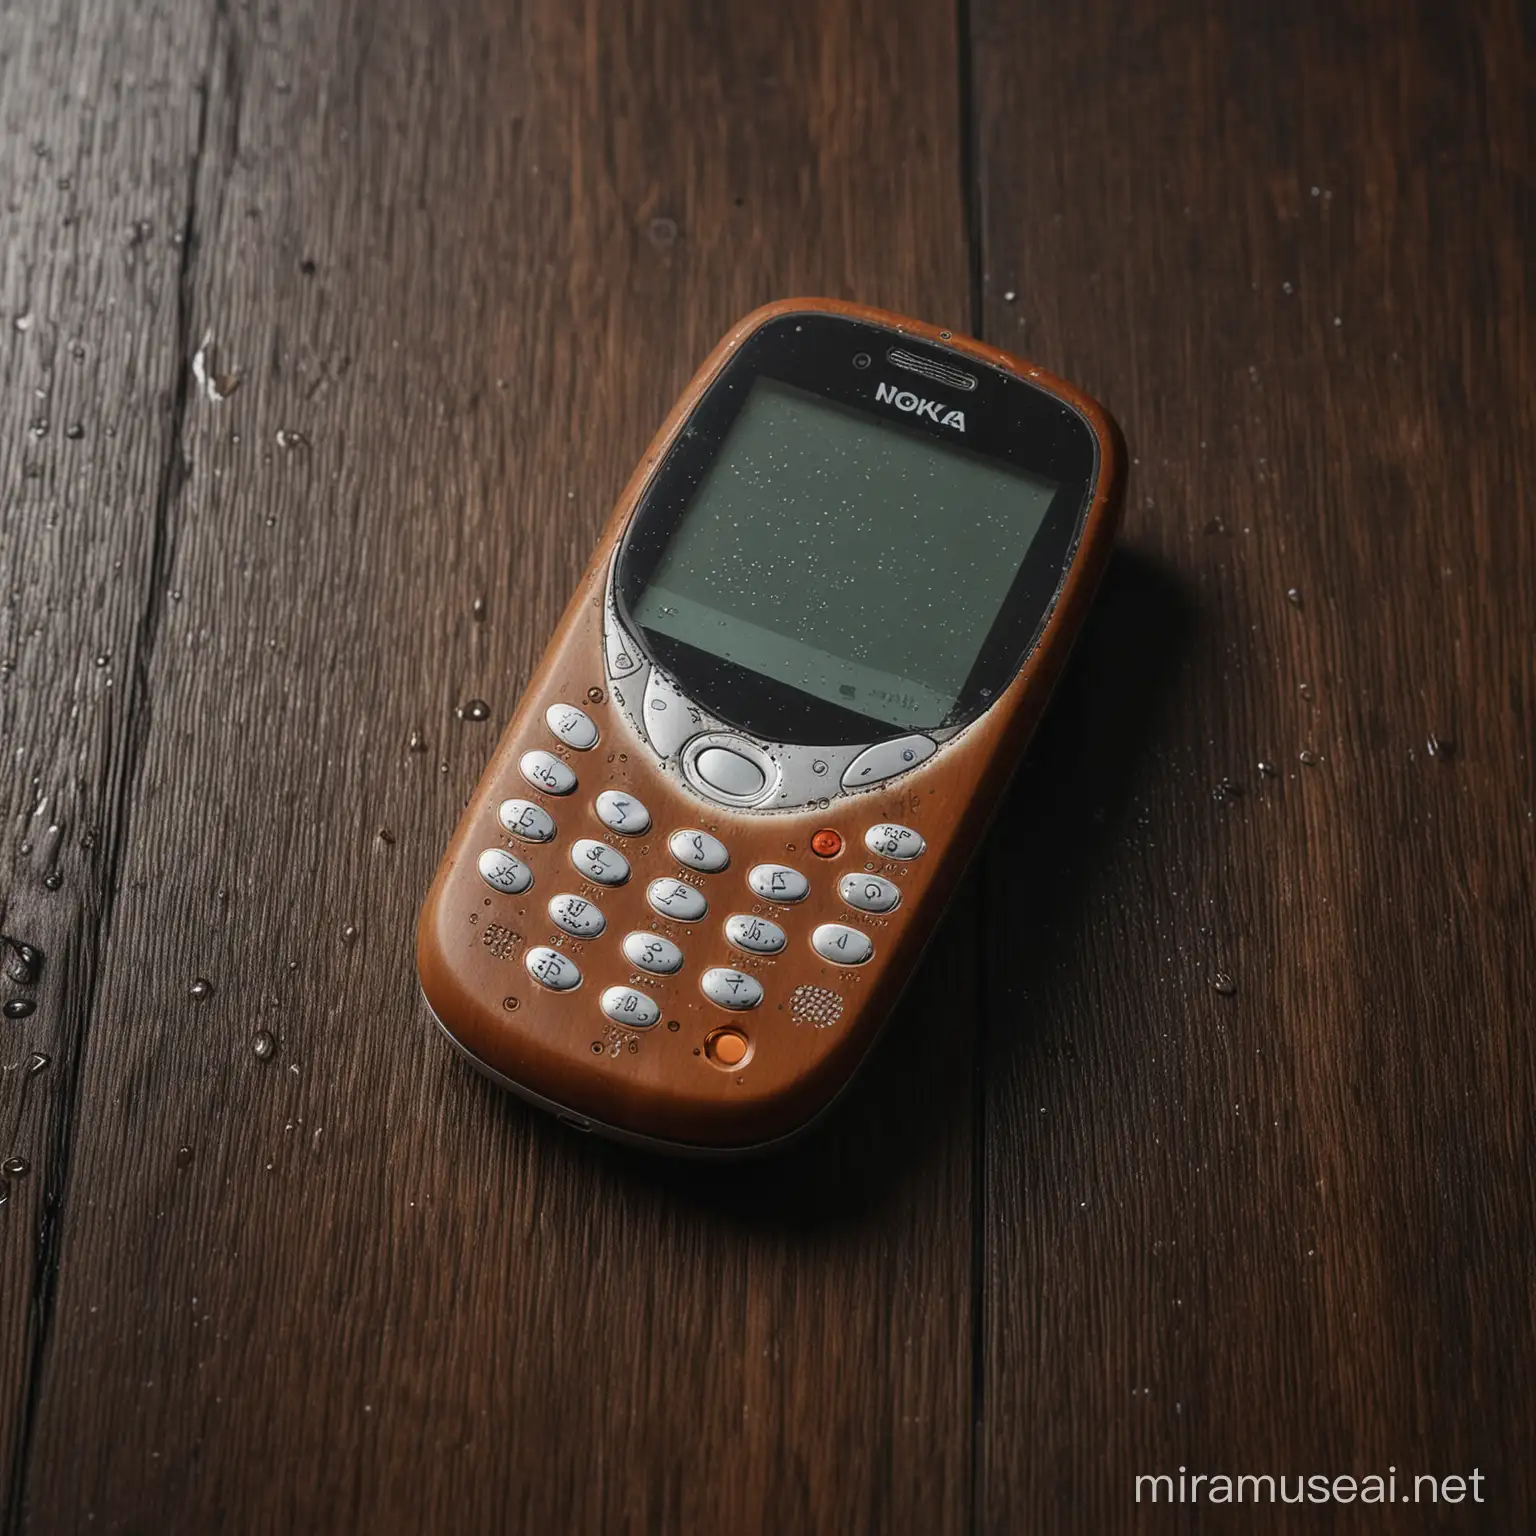 Highresolution Photography of Nokia 3310 Series on Wooden Floor with Reflective Surface